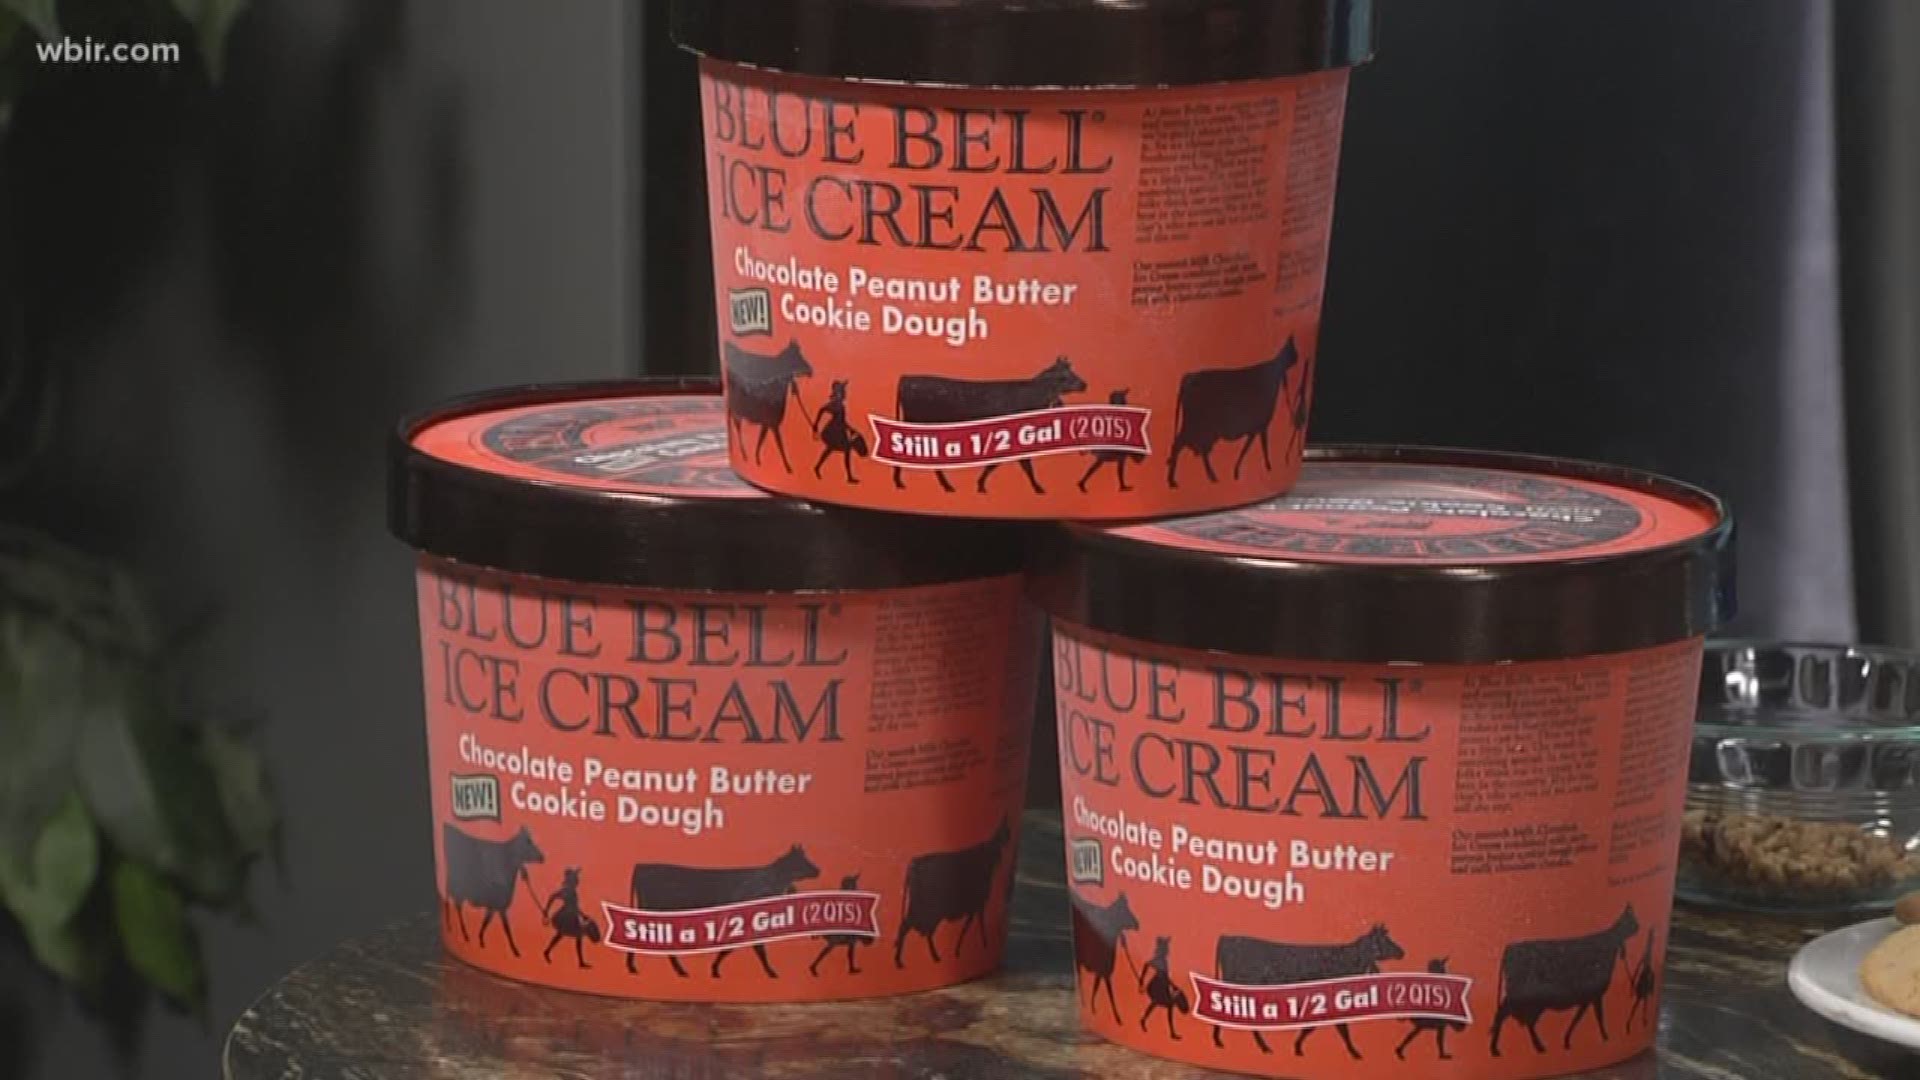 Blue Bell Ice Cream came on the show to show us how to make ice cream sandwiches with their newest ice cream flavor. RECIPE: 1 half gallon of Blue Bell Chocolate Peanut Butter Cookie Dough Ice CreamPeanut Butter Cookies*Assorted ToppingsPlace a scoop